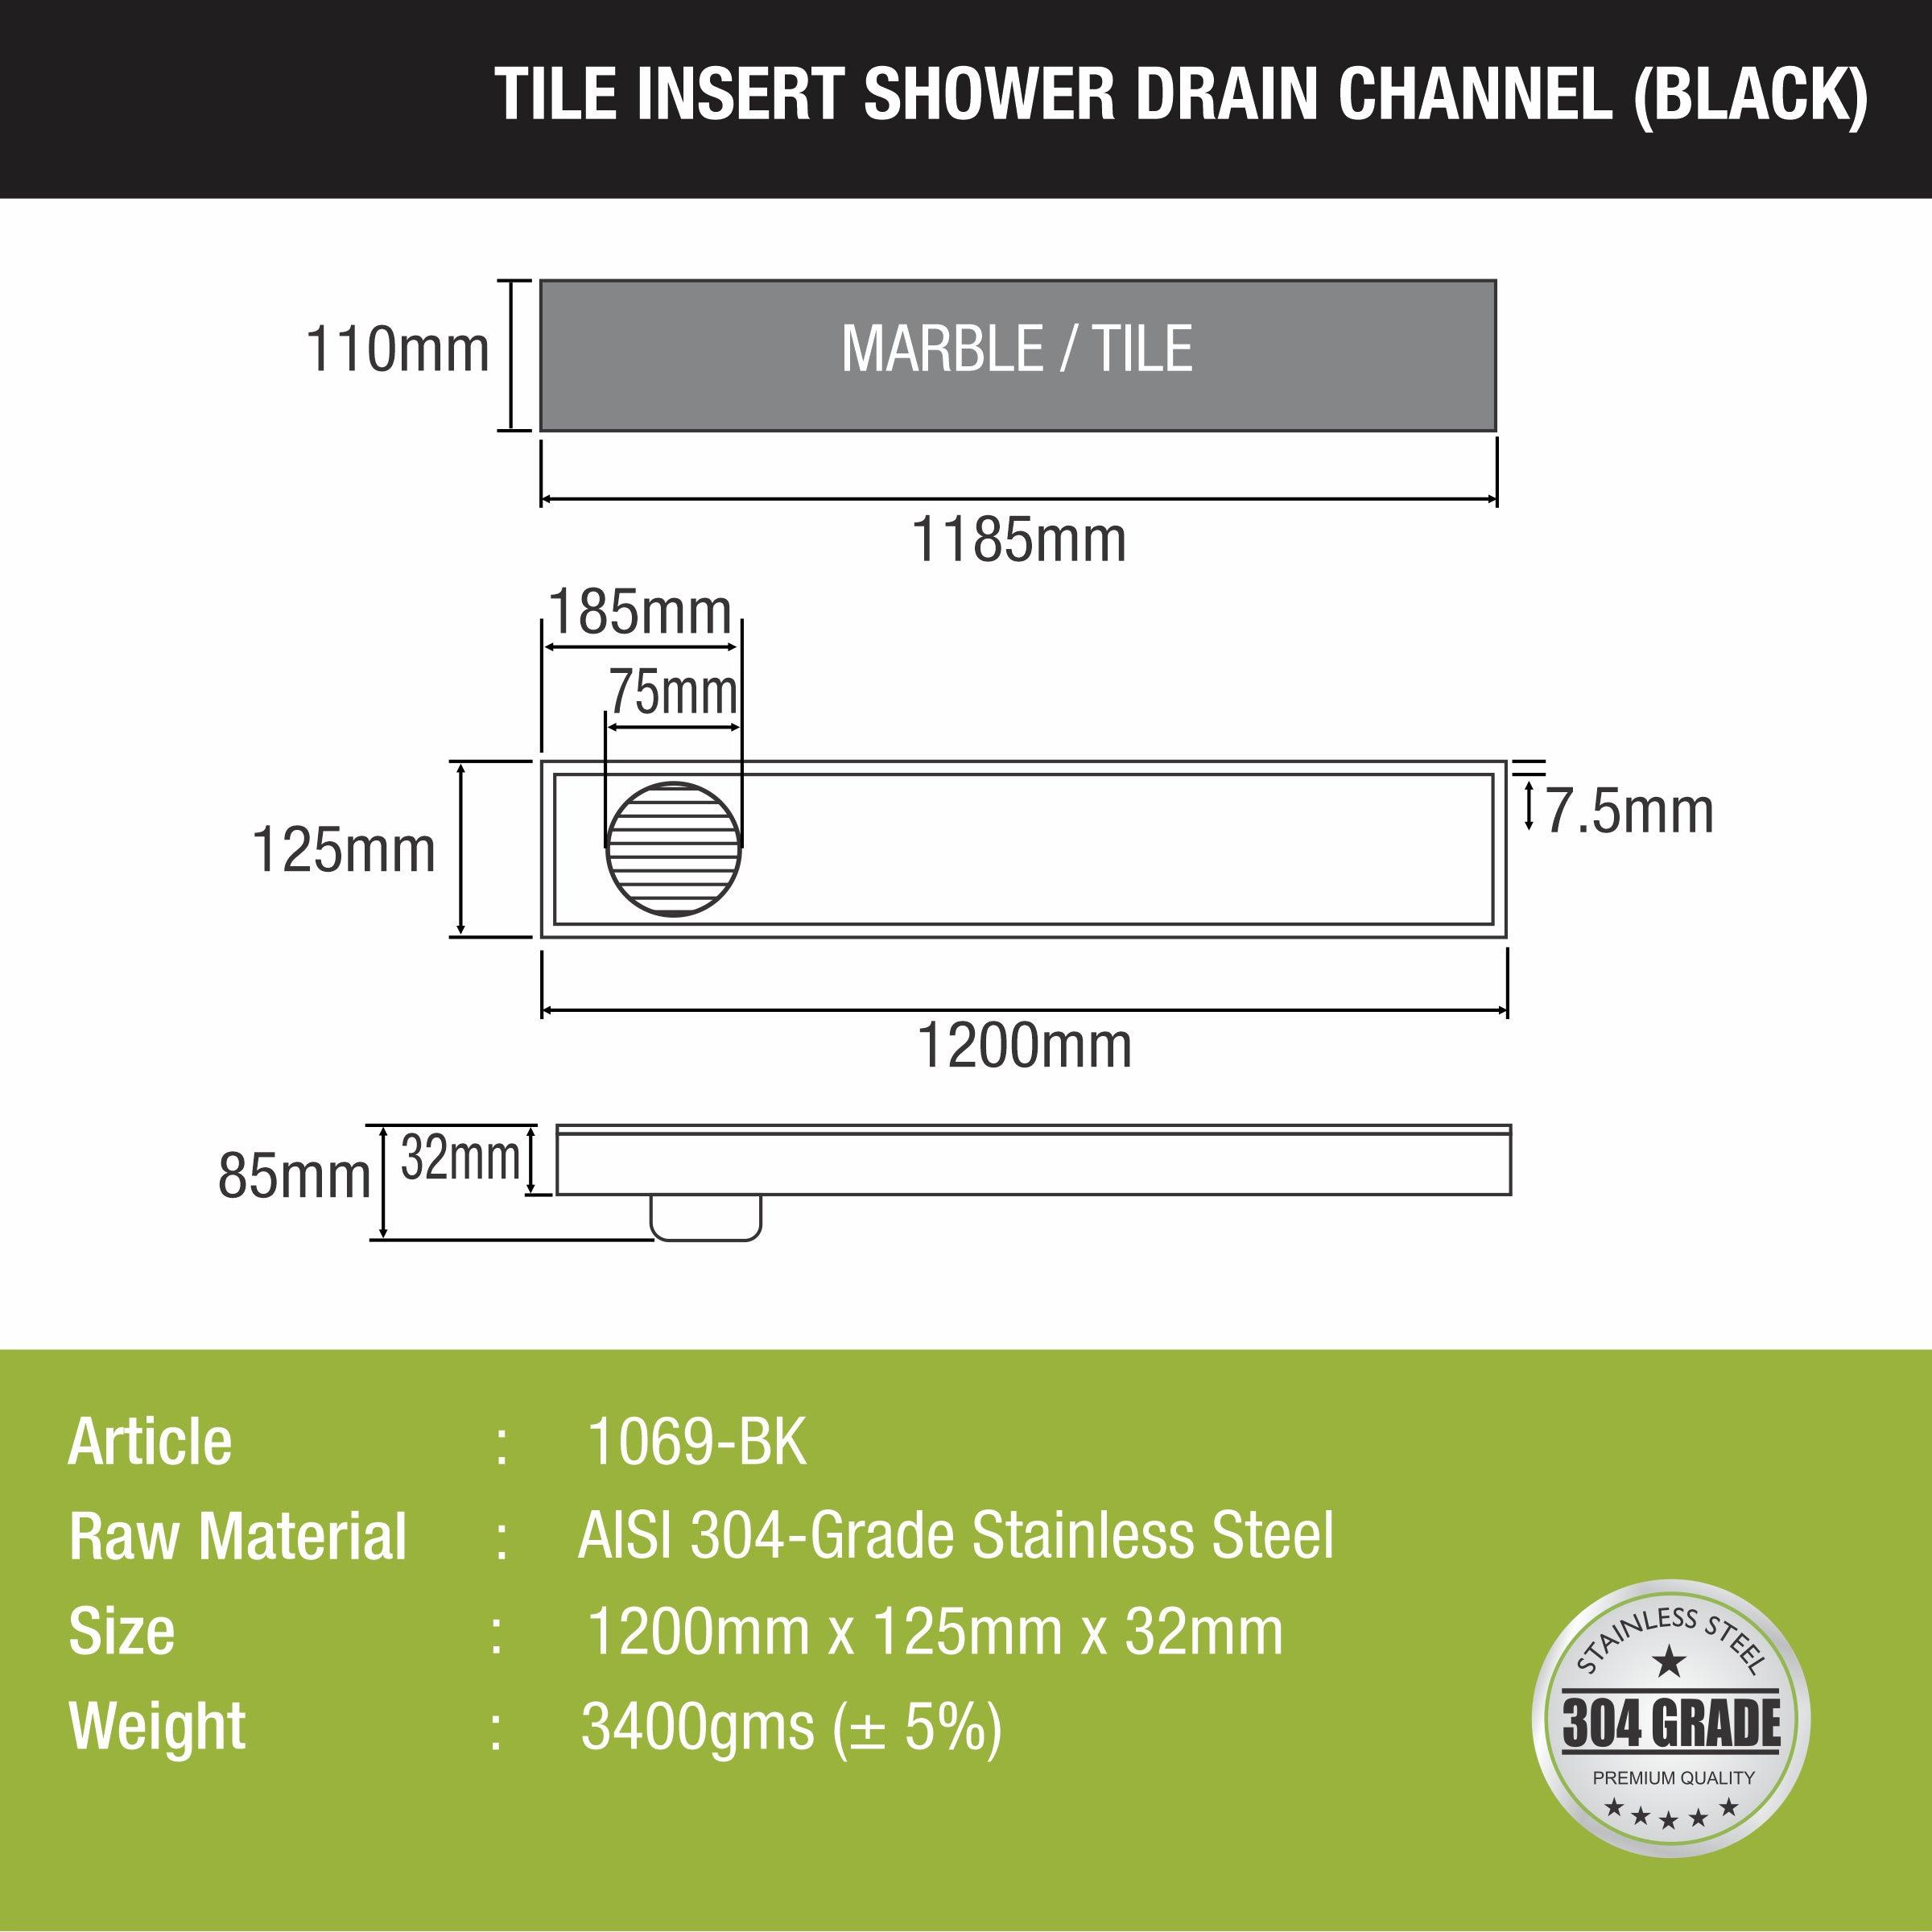 Tile Insert Shower Drain Channel - Black (48 x 5 Inches) size and measurement